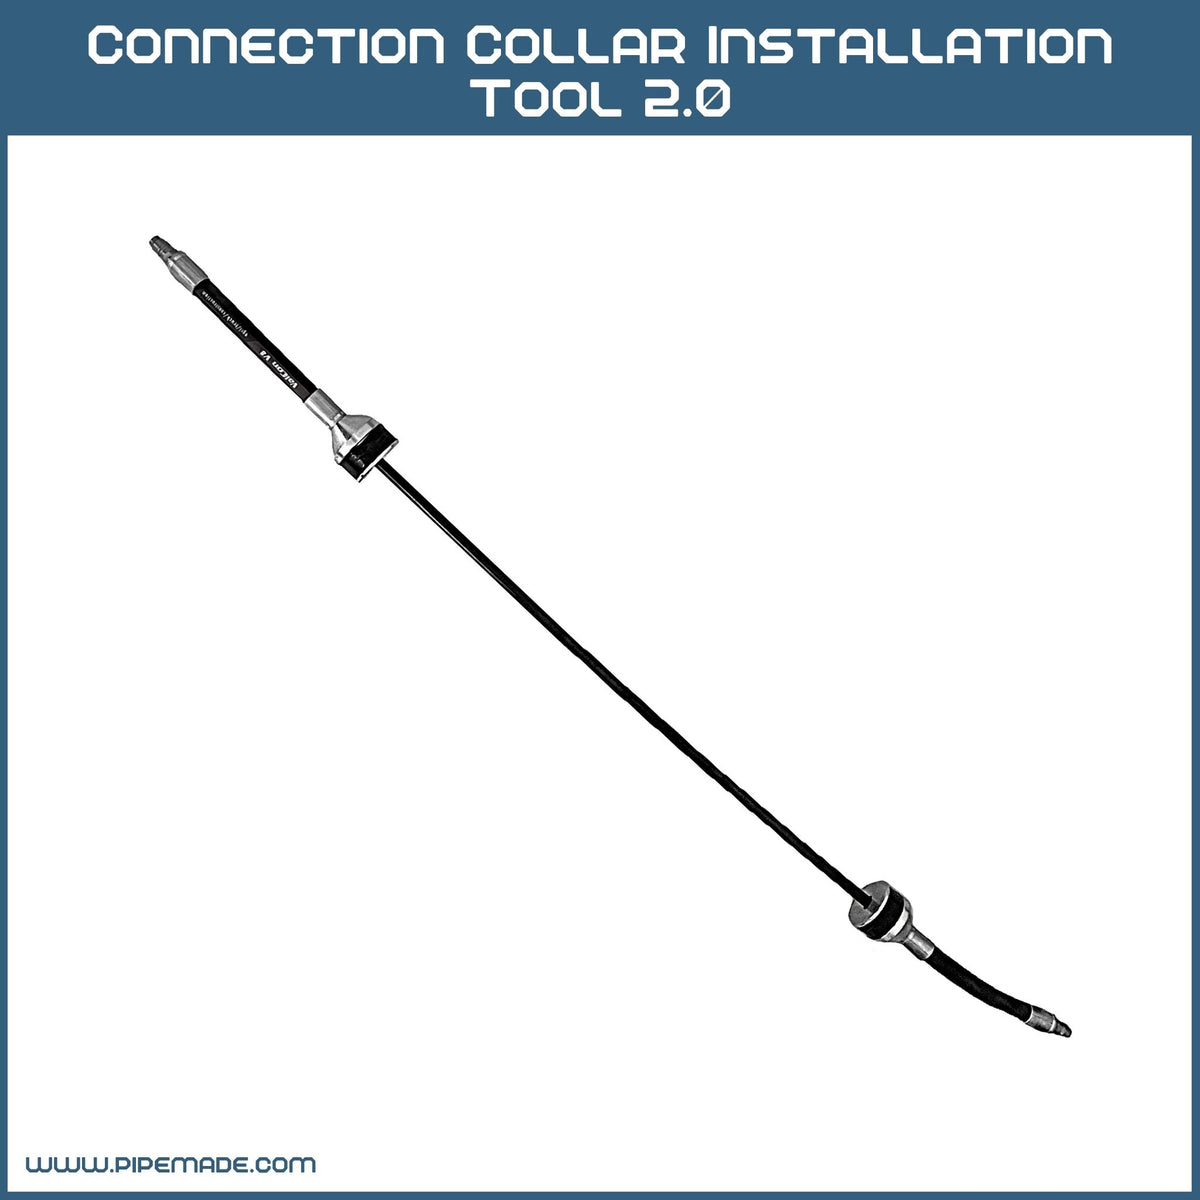 Connection Collar Installation Tool 2.0 | CIPP Lining Tools | Picote Solutions | picote-connection-collar-installation-tool